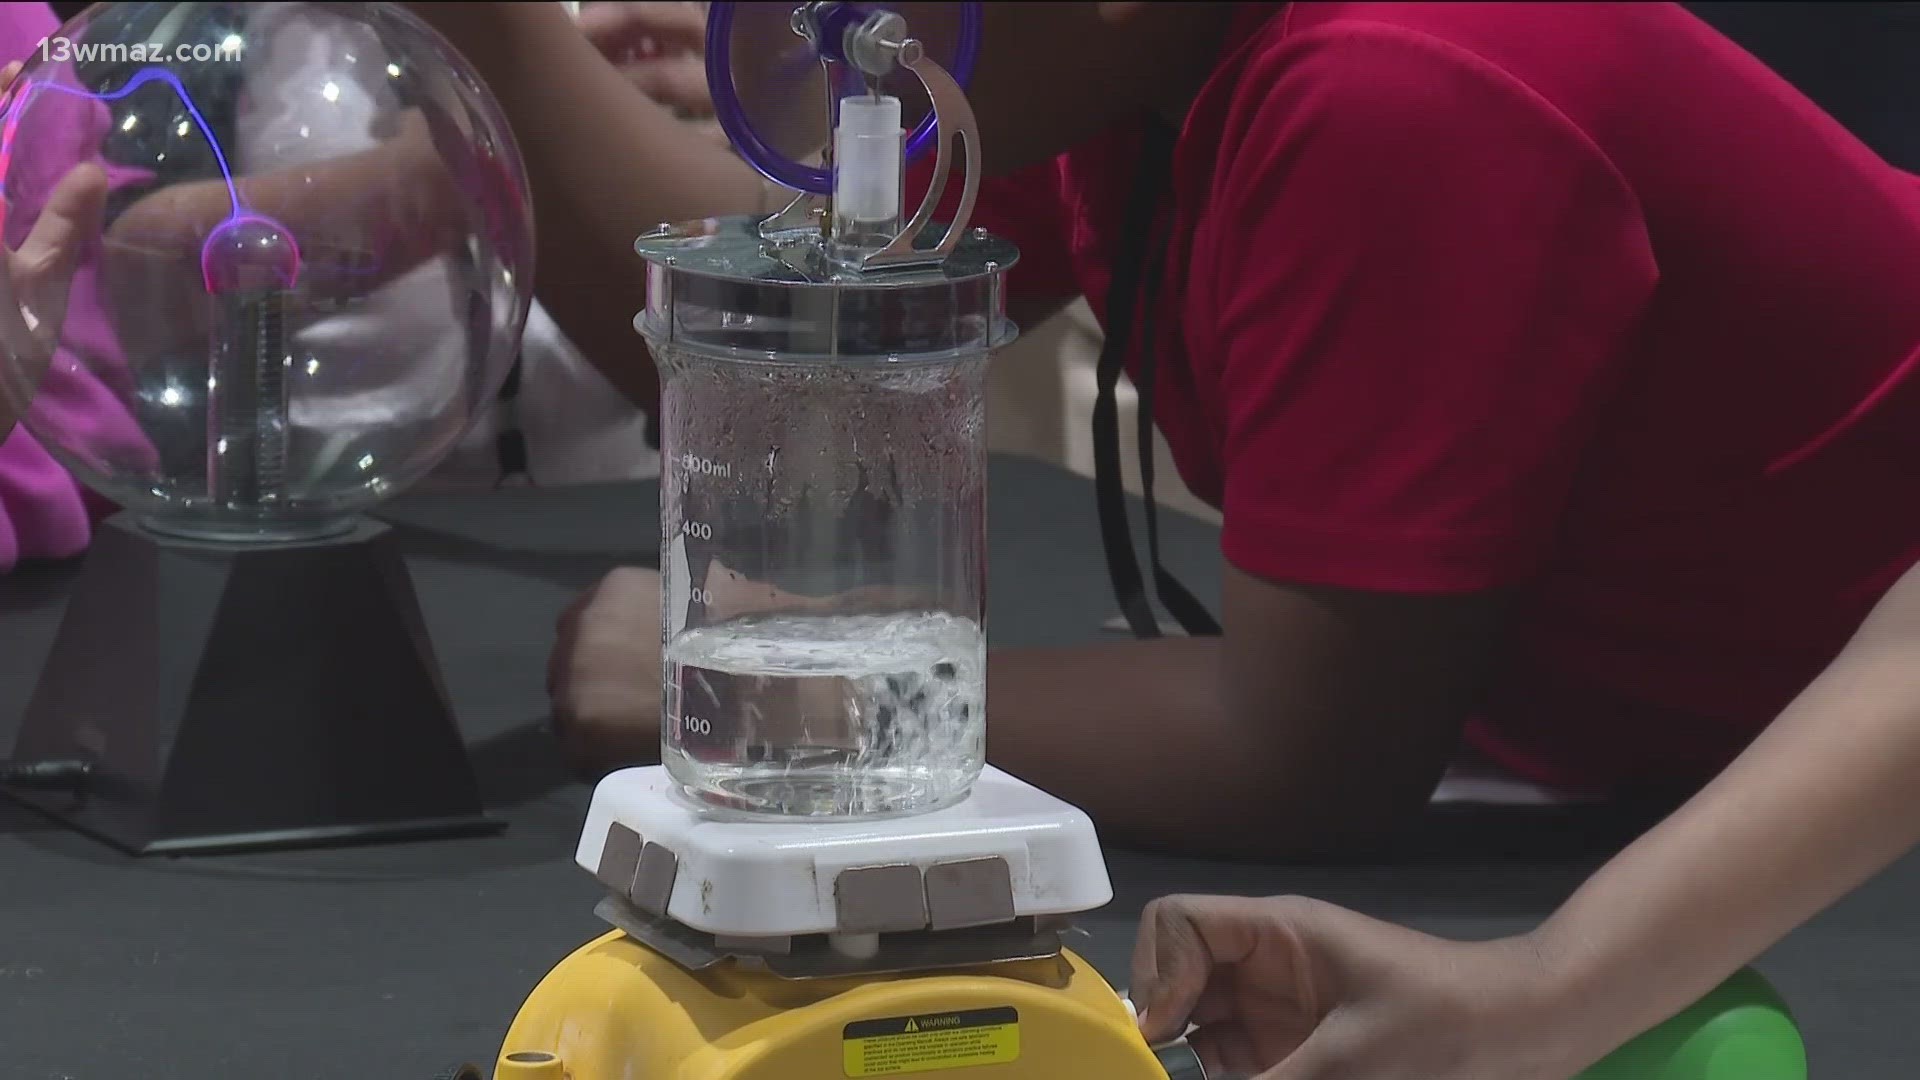 Elementary school kids from across Georgia came to Milledgeville to showcase their science projects.